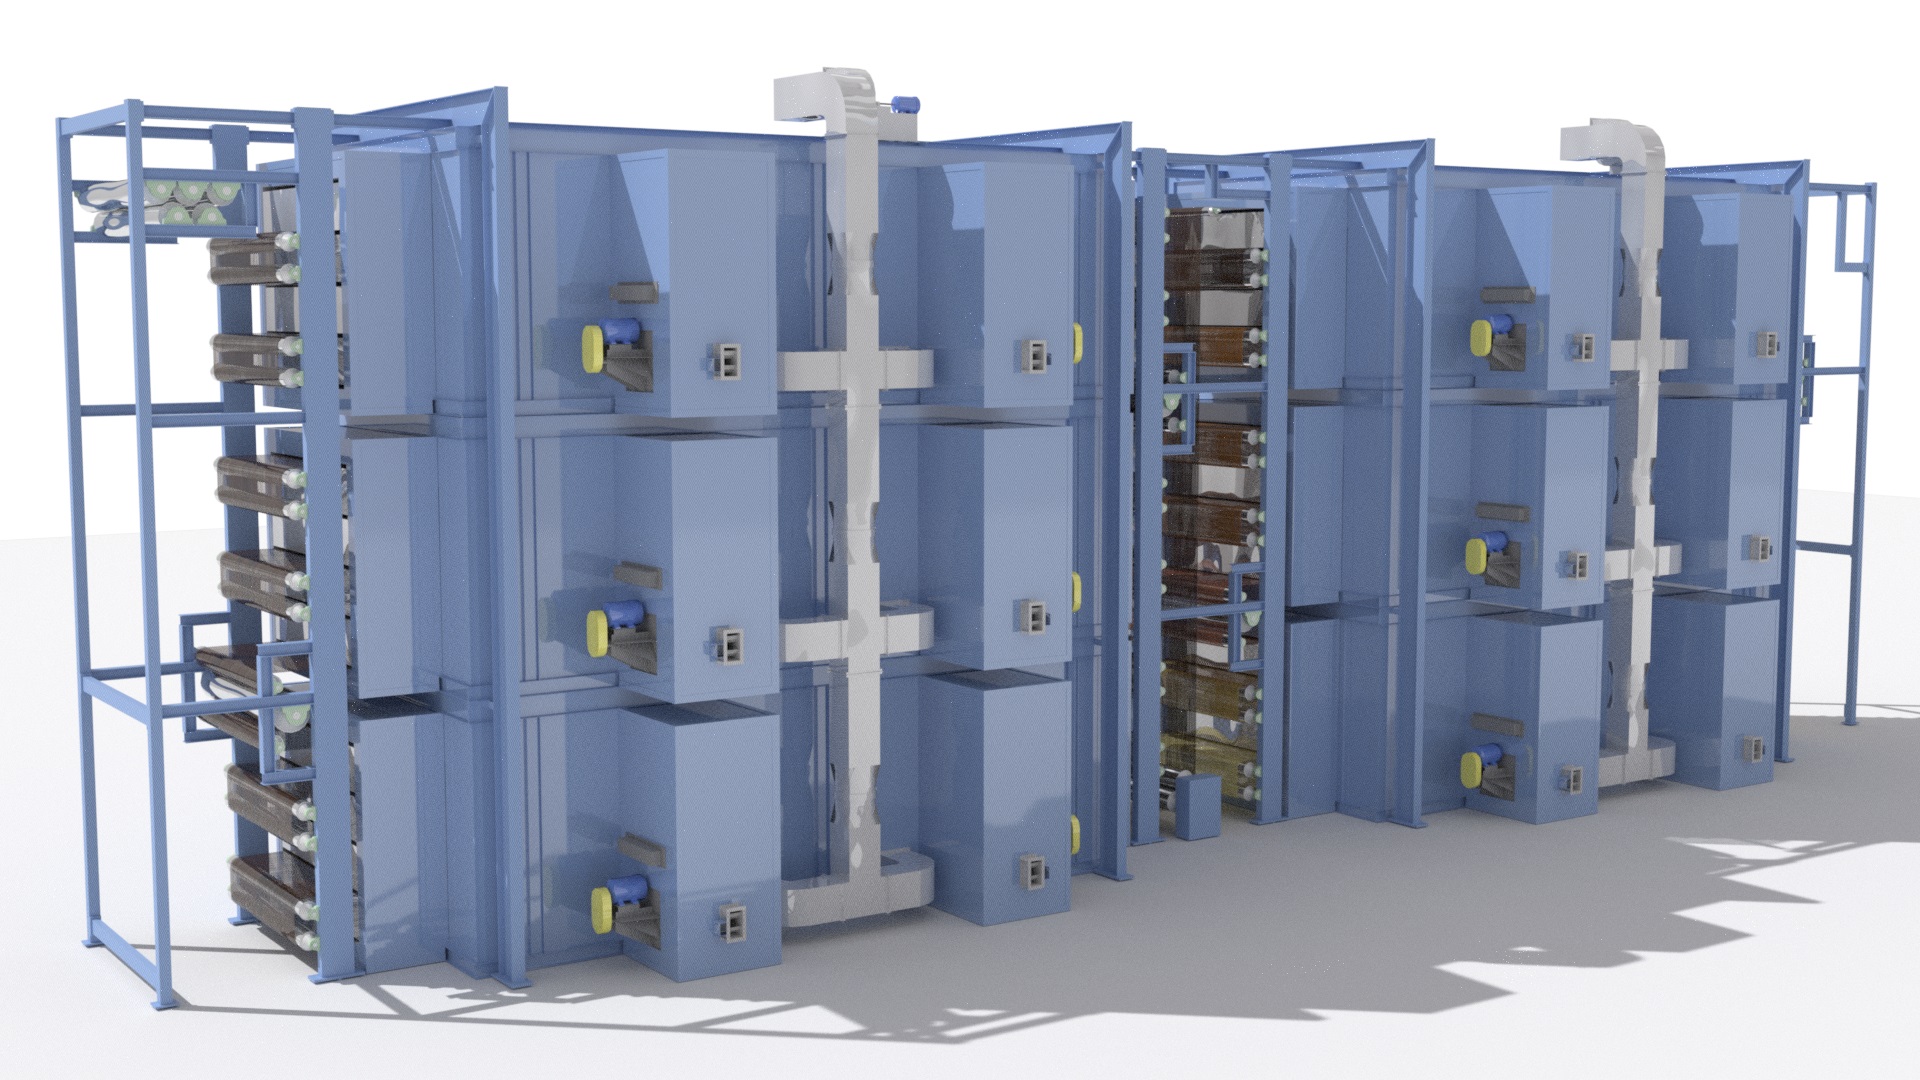 Rendering of a plasma oxidation oven system courtesy of RMX.